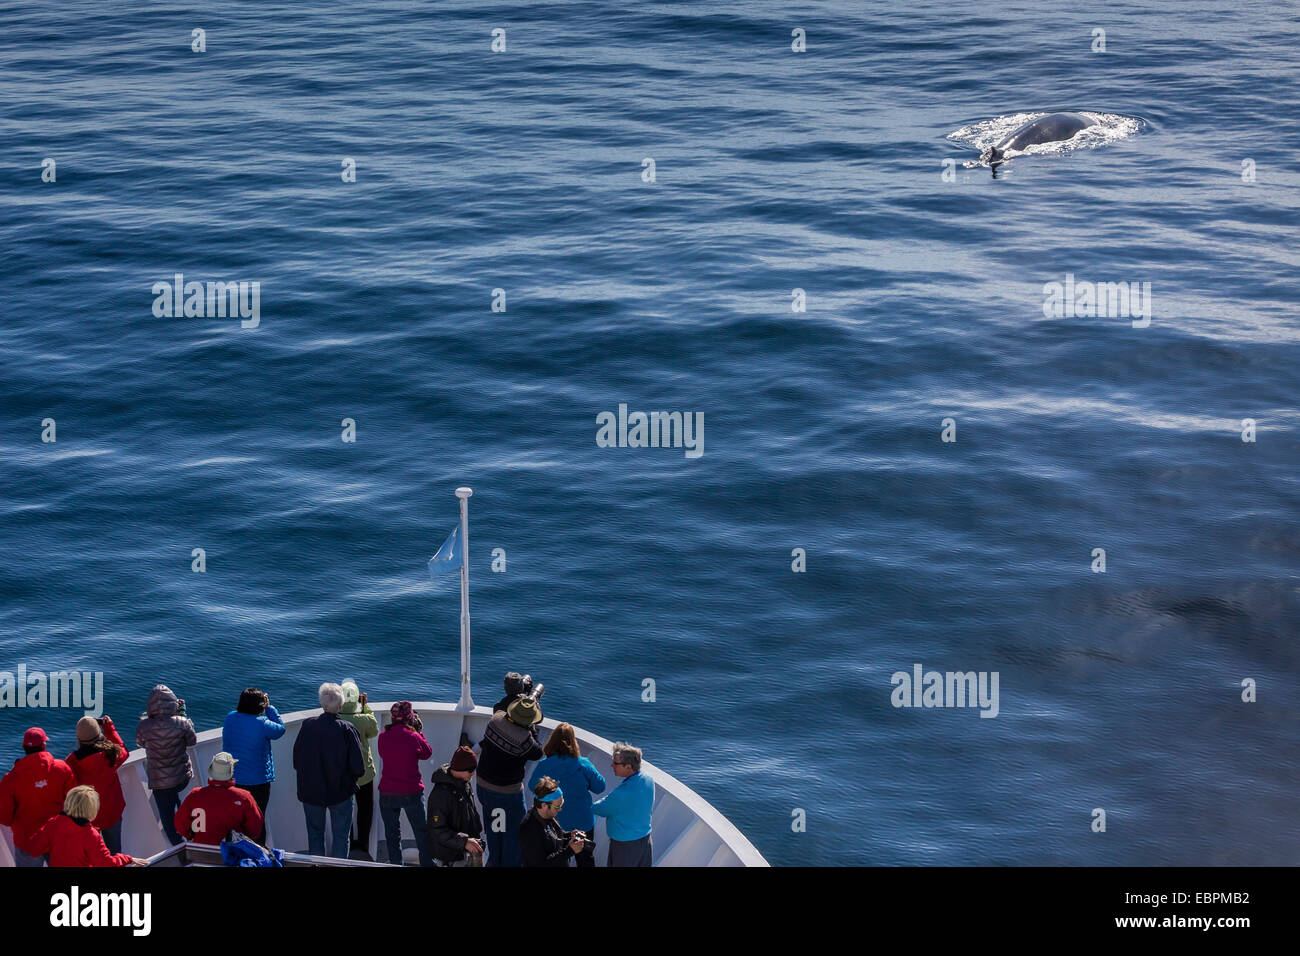 Adult fin whale surfacing off the bow of the National Geographic Explorer, Spitsbergen, Svalbard, Arctic, Norway, Scandinavia Stock Photo